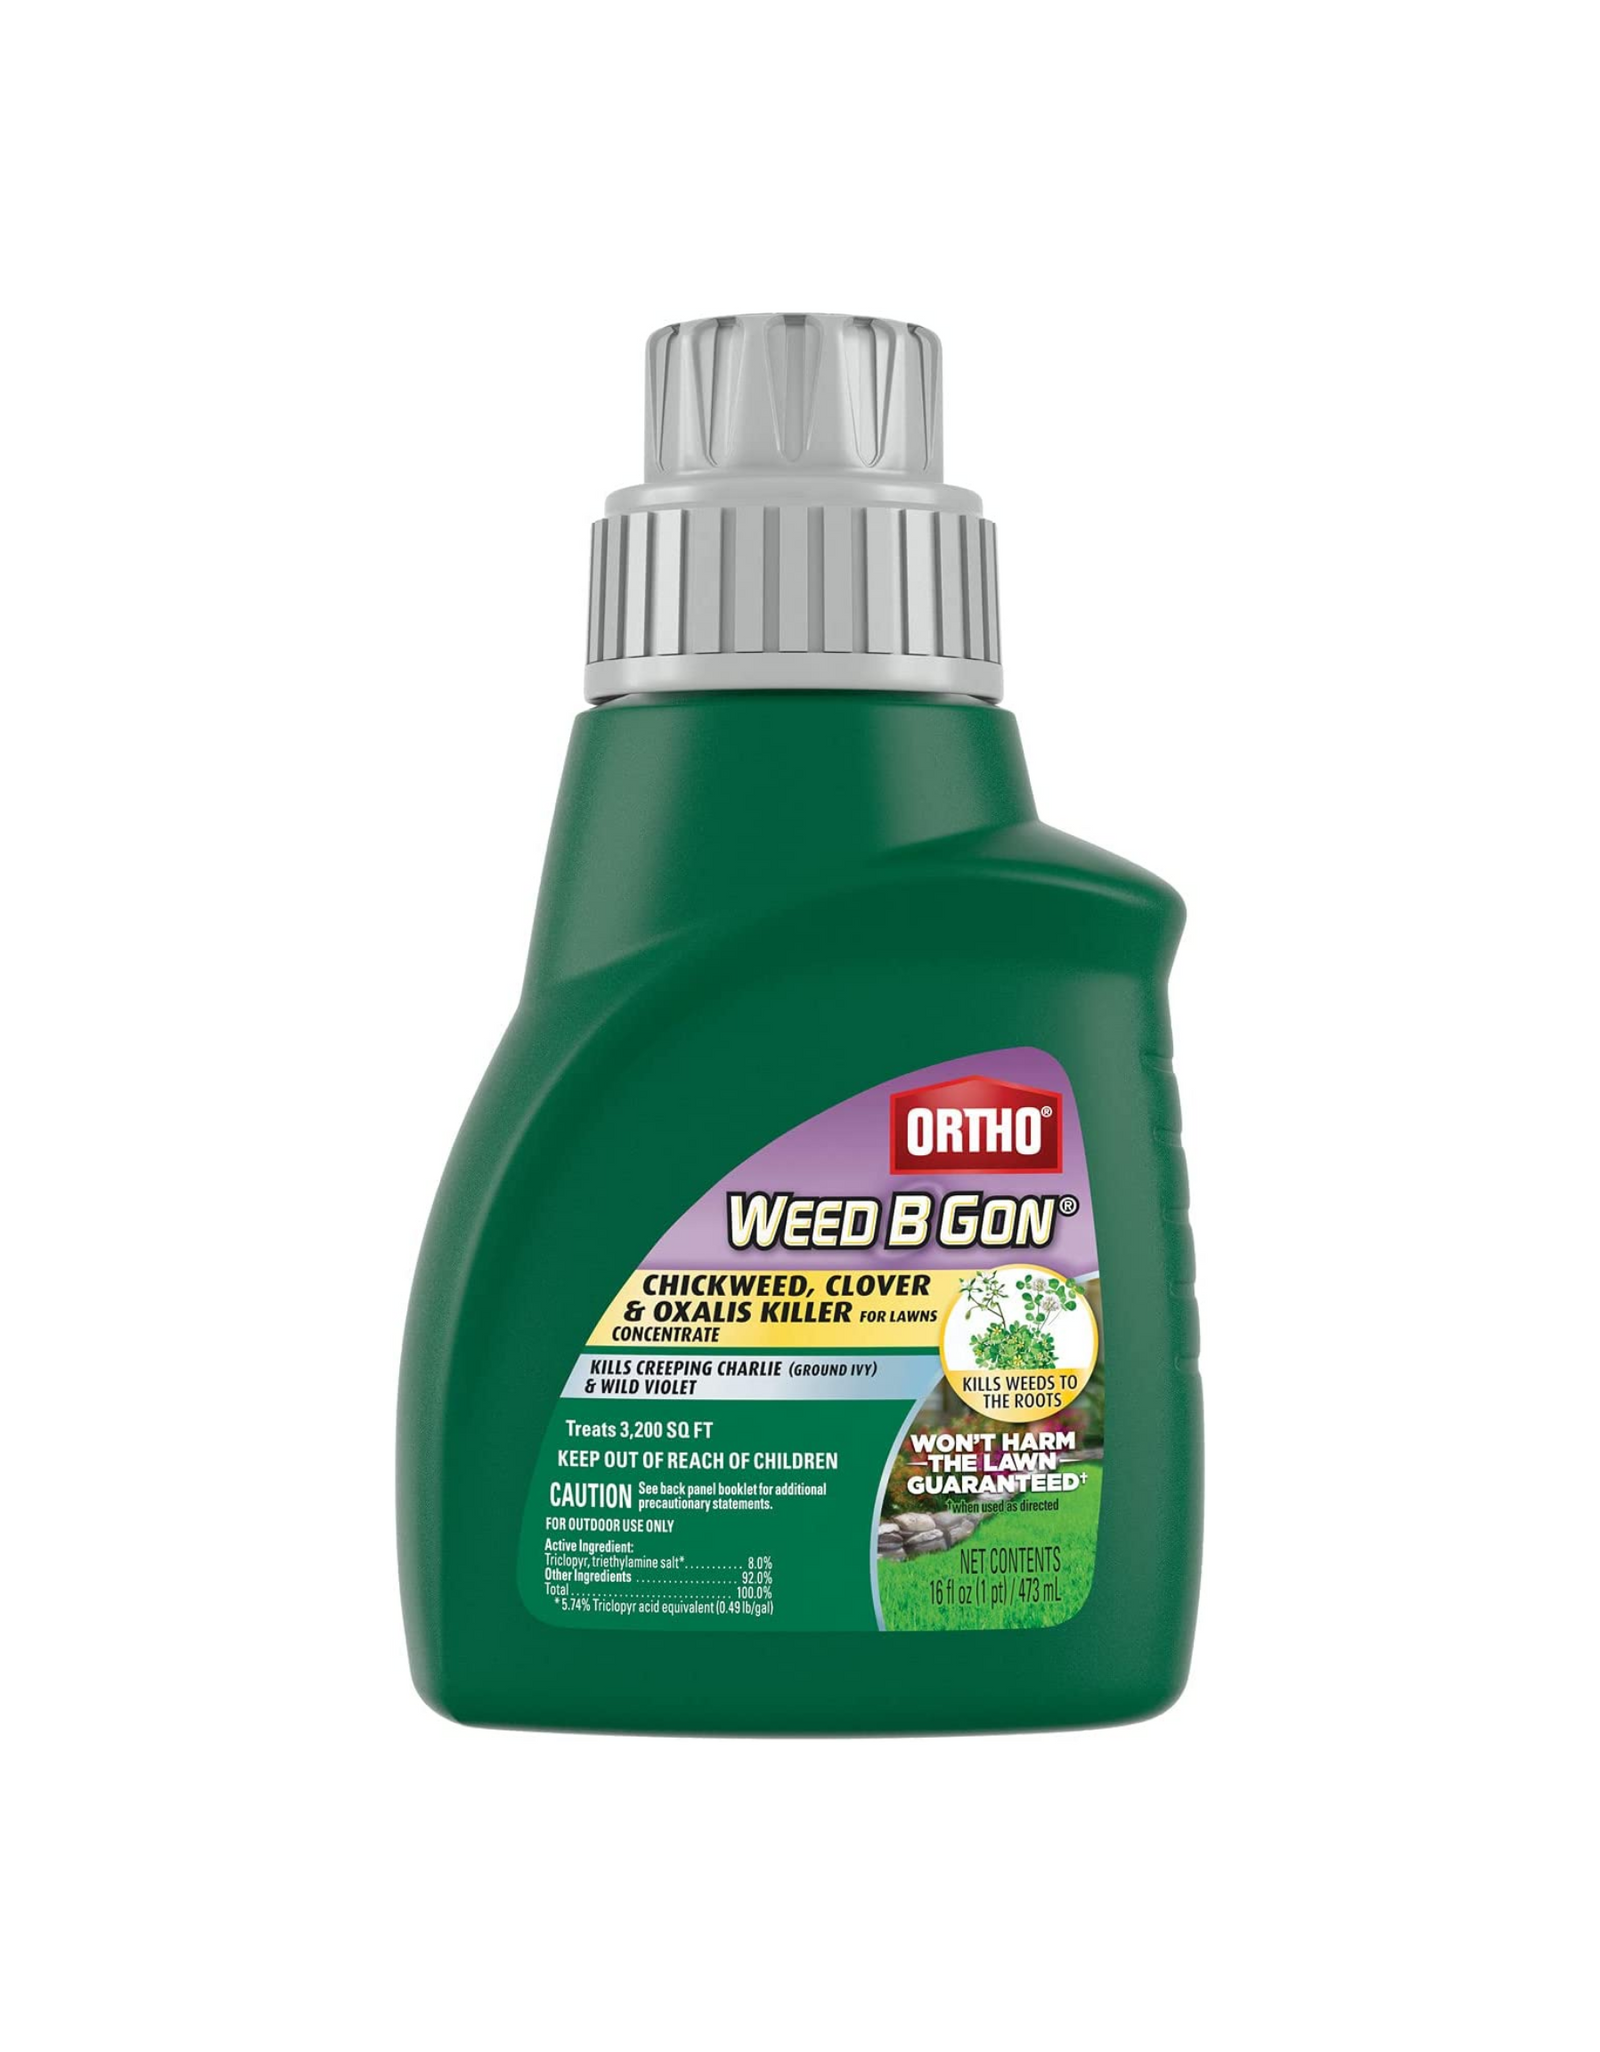 Ortho Weed B Gon Chickweed, Clover & Oxalis Killer for Lawns Concentrate, 16 oz. - Treats 3200 Square Ft.